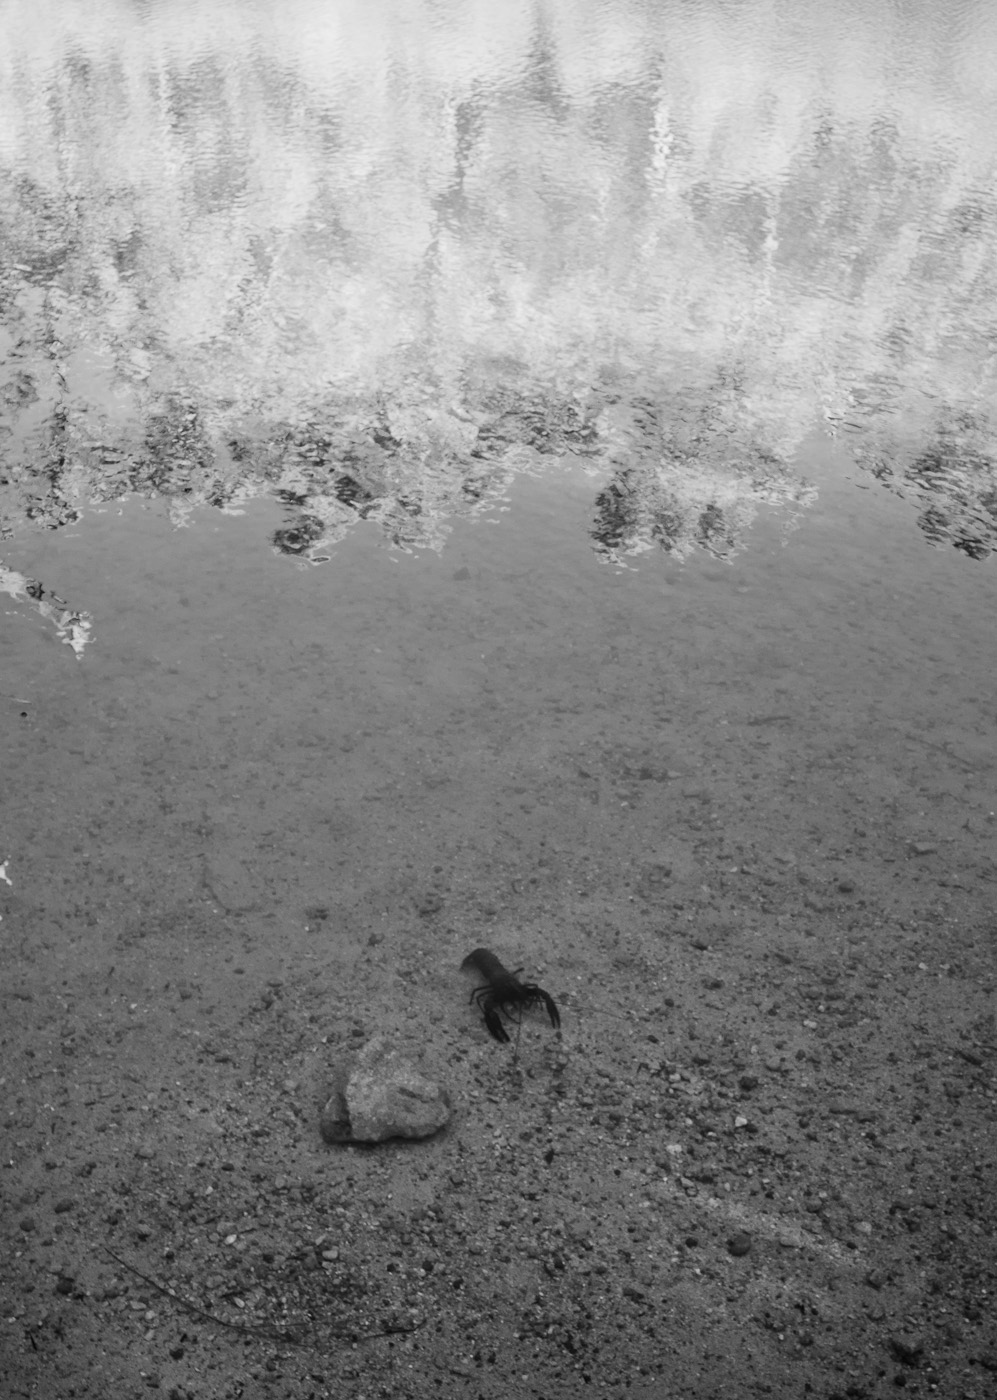 A rock lobster in a Margaret River lake, WA. Sony NEX-5n and Zeiss ZM 25mm f/2.8 Biogon